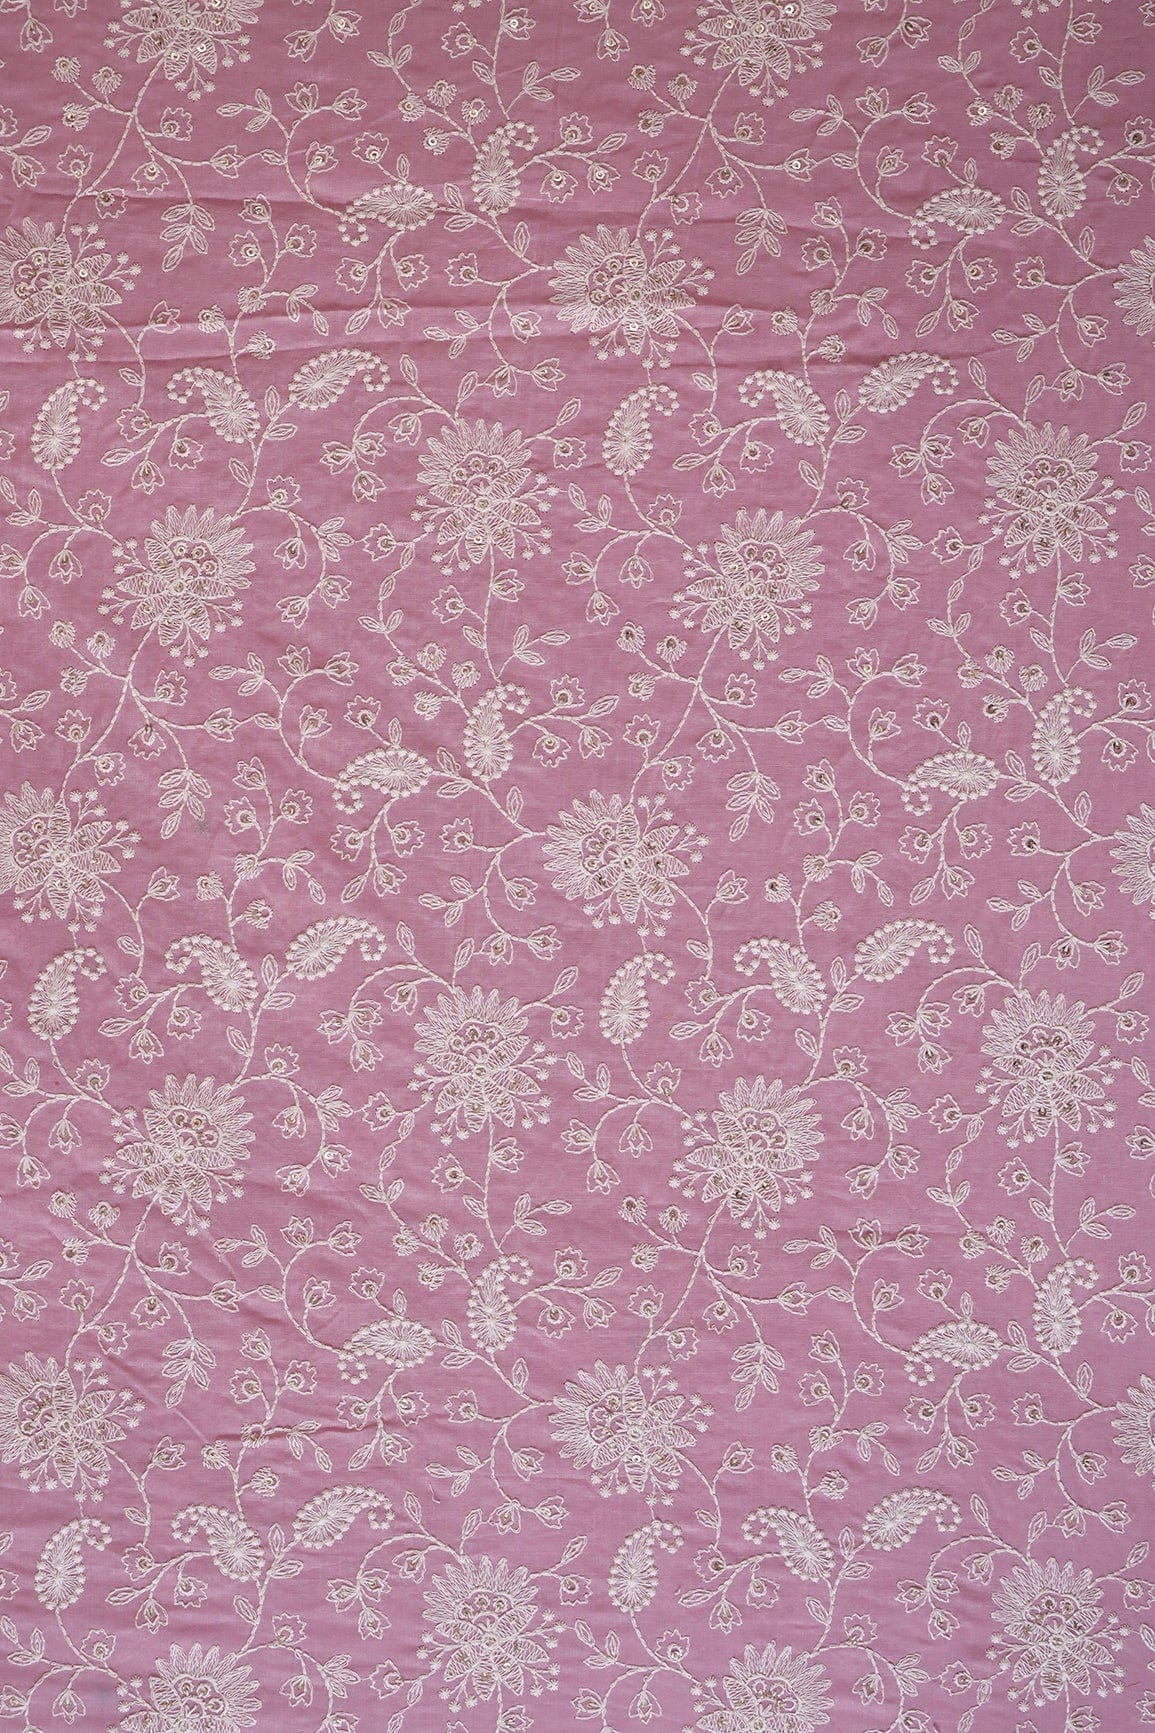 doeraa Embroidery Fabrics Beautiful White Thread With Gold Sequins Lucknowi Floral Embroidery Work On Pink Soft Cotton Fabric